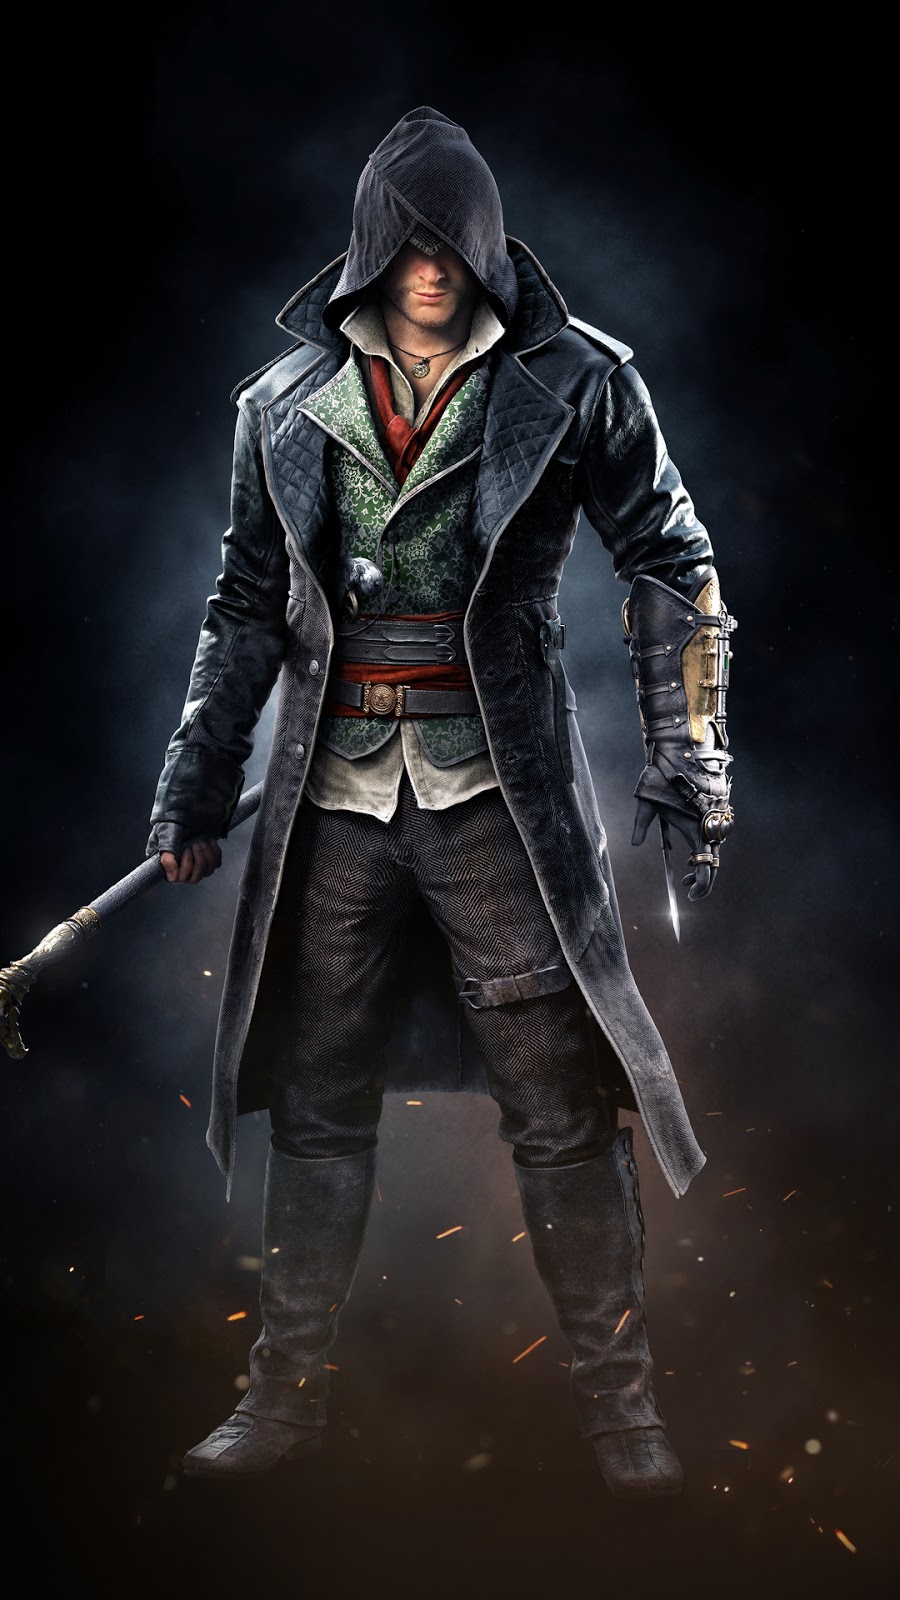 Download Wallpaper Assassins Creed Syndicate, Hd, 4k Images.